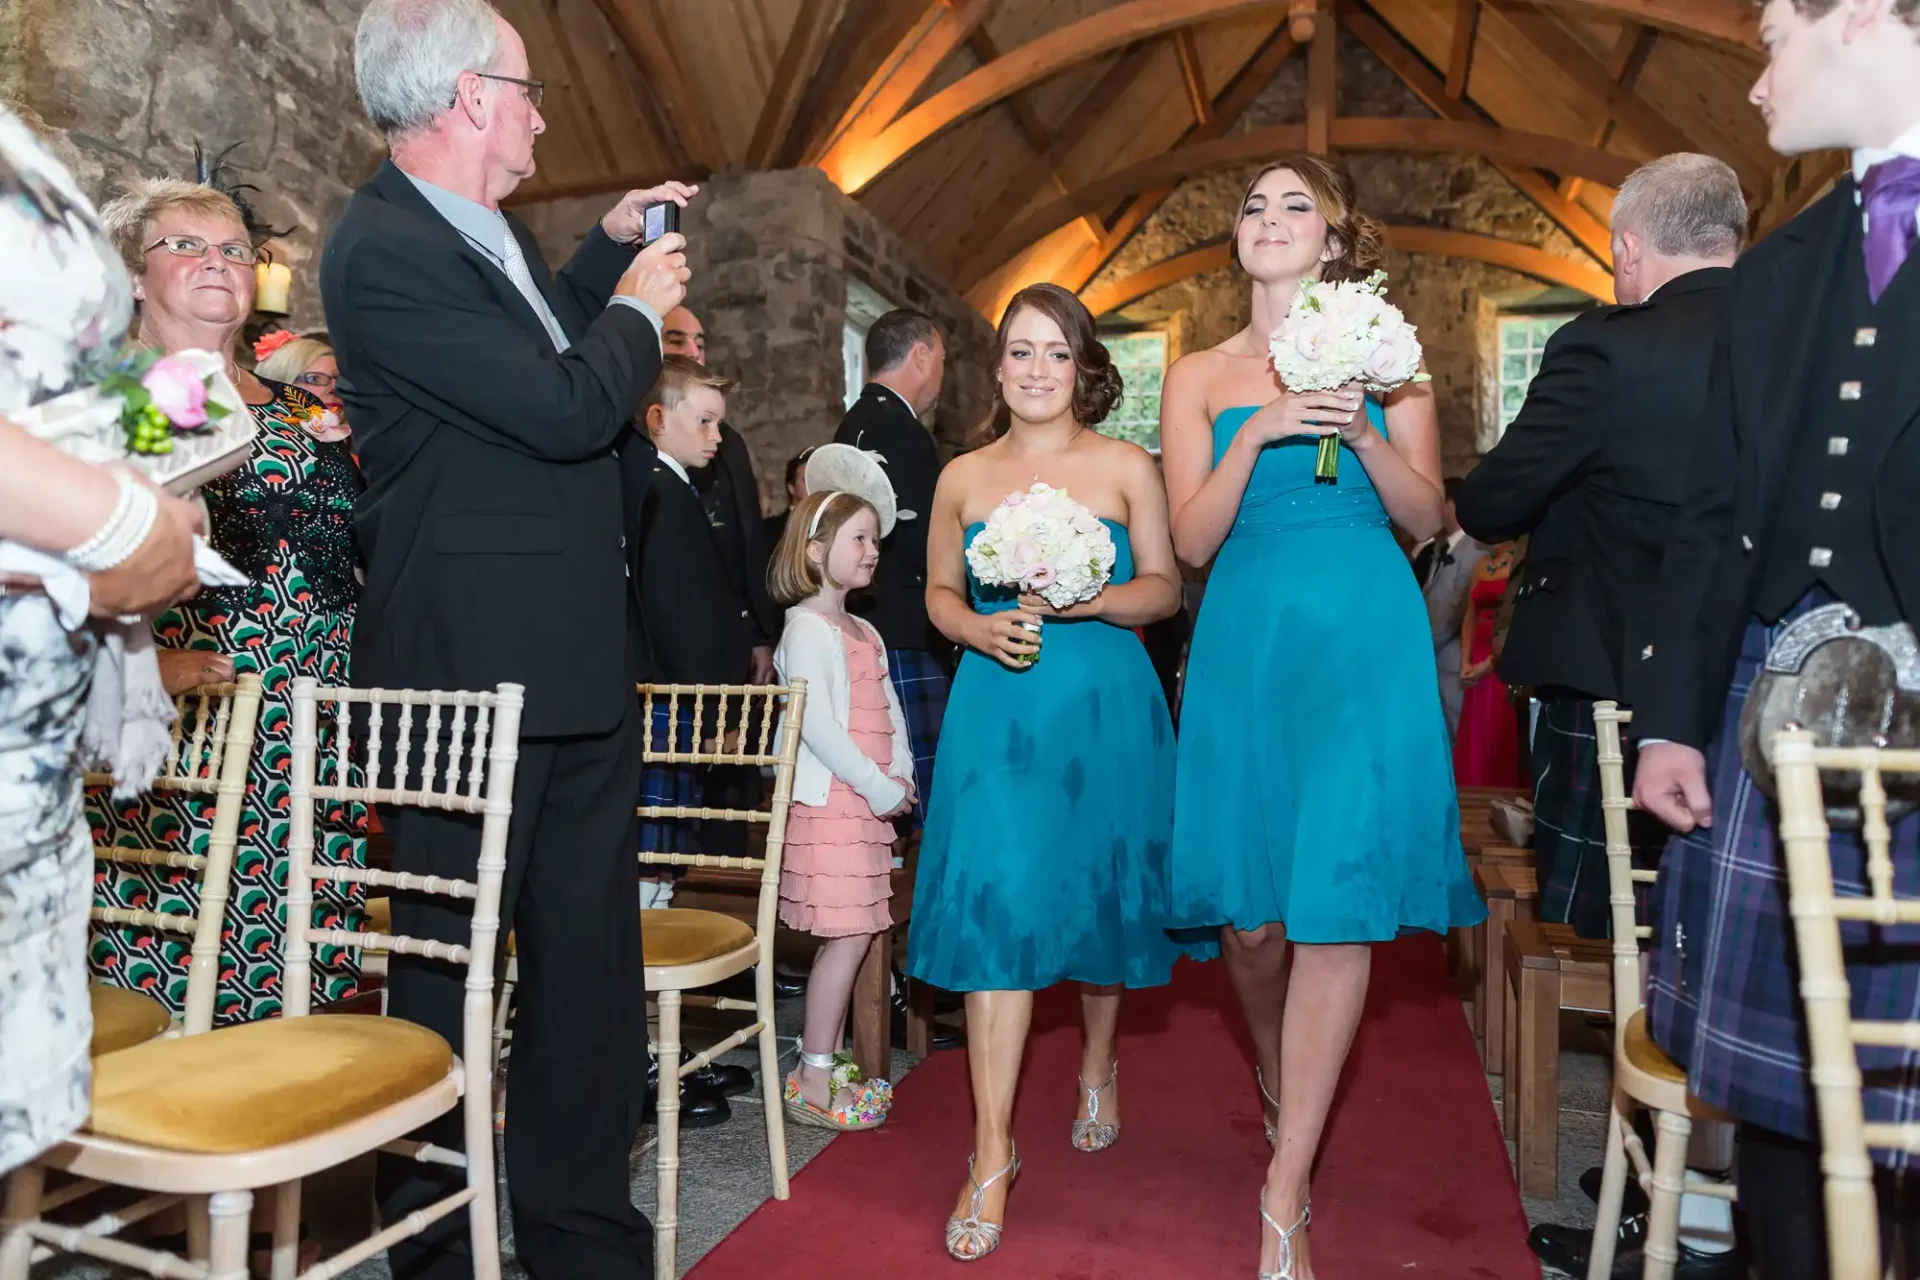 Two bridesmaids in teal dresses walk down the aisle at a wedding, holding bouquets, with guests watching and a man taking photos.